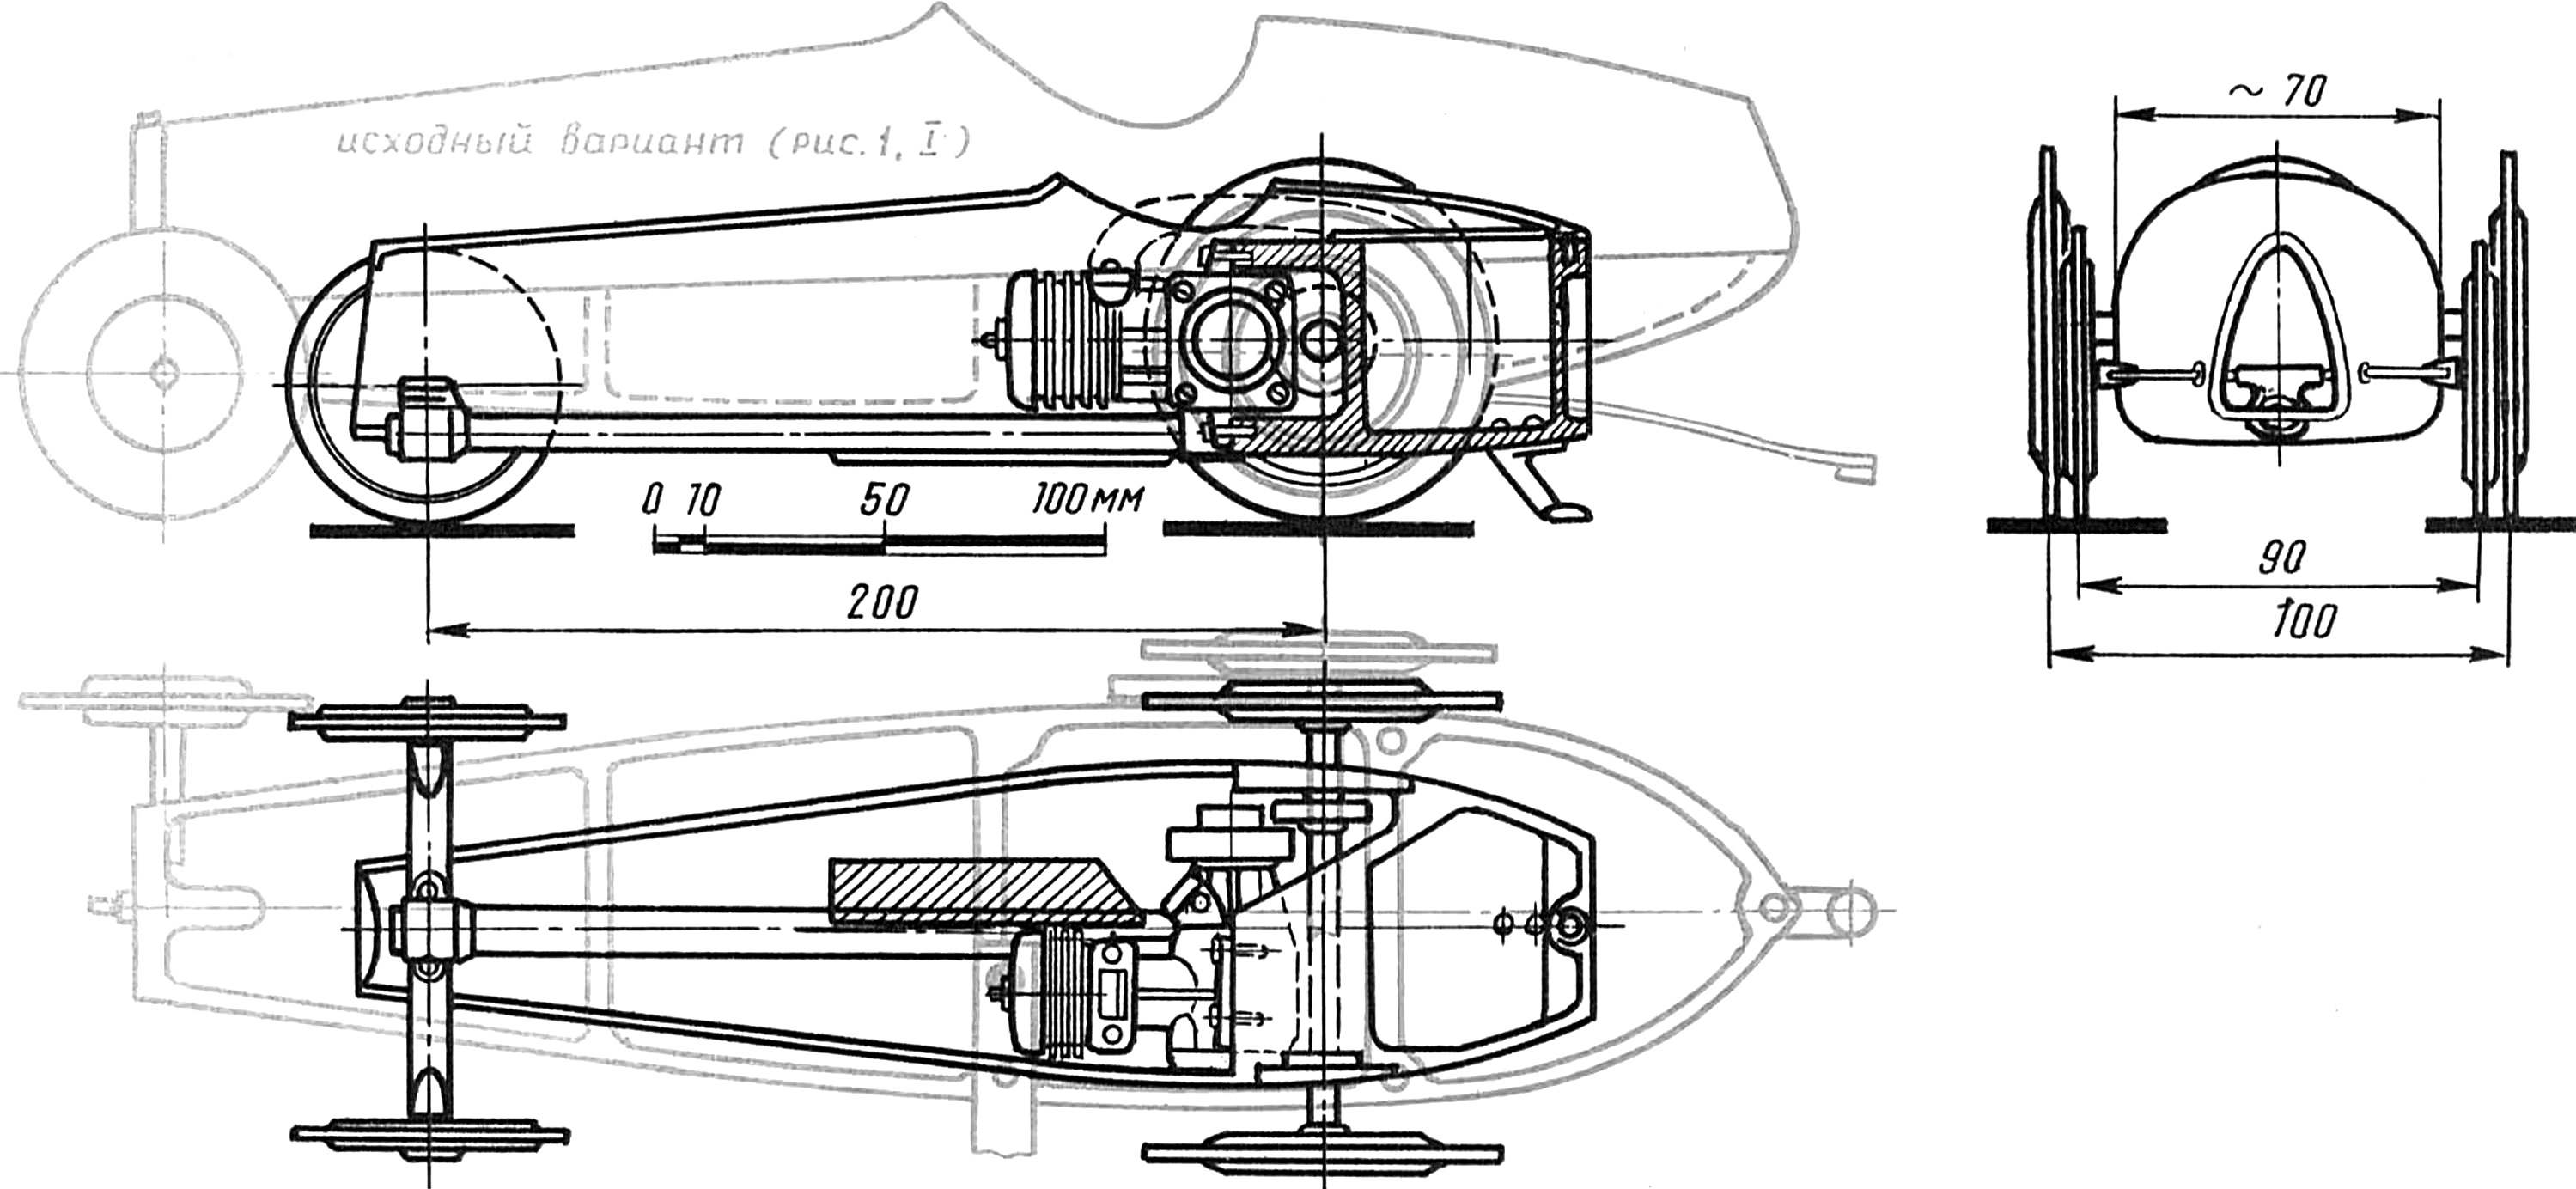 Fig. 5. Model class E-5 in the second stage of the design process.